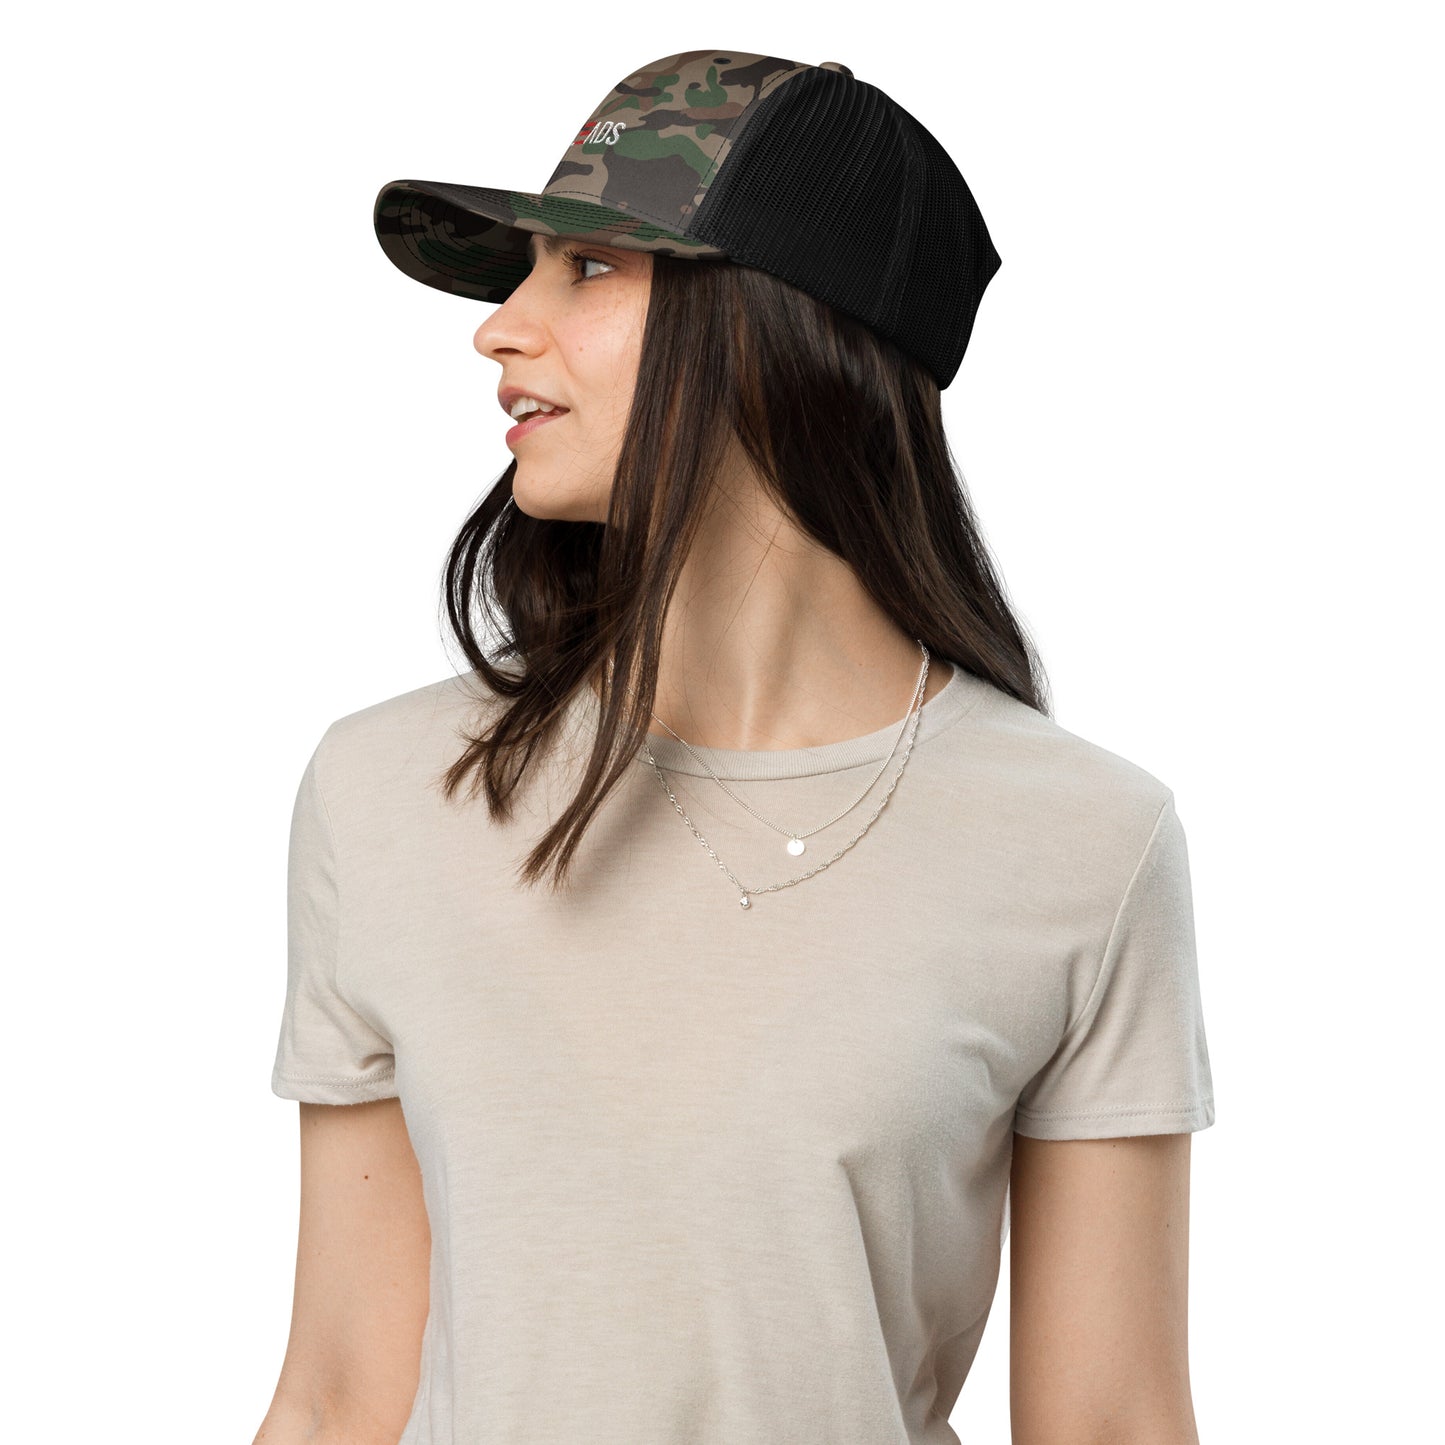 She Leads Collection: Camouflage trucker hat